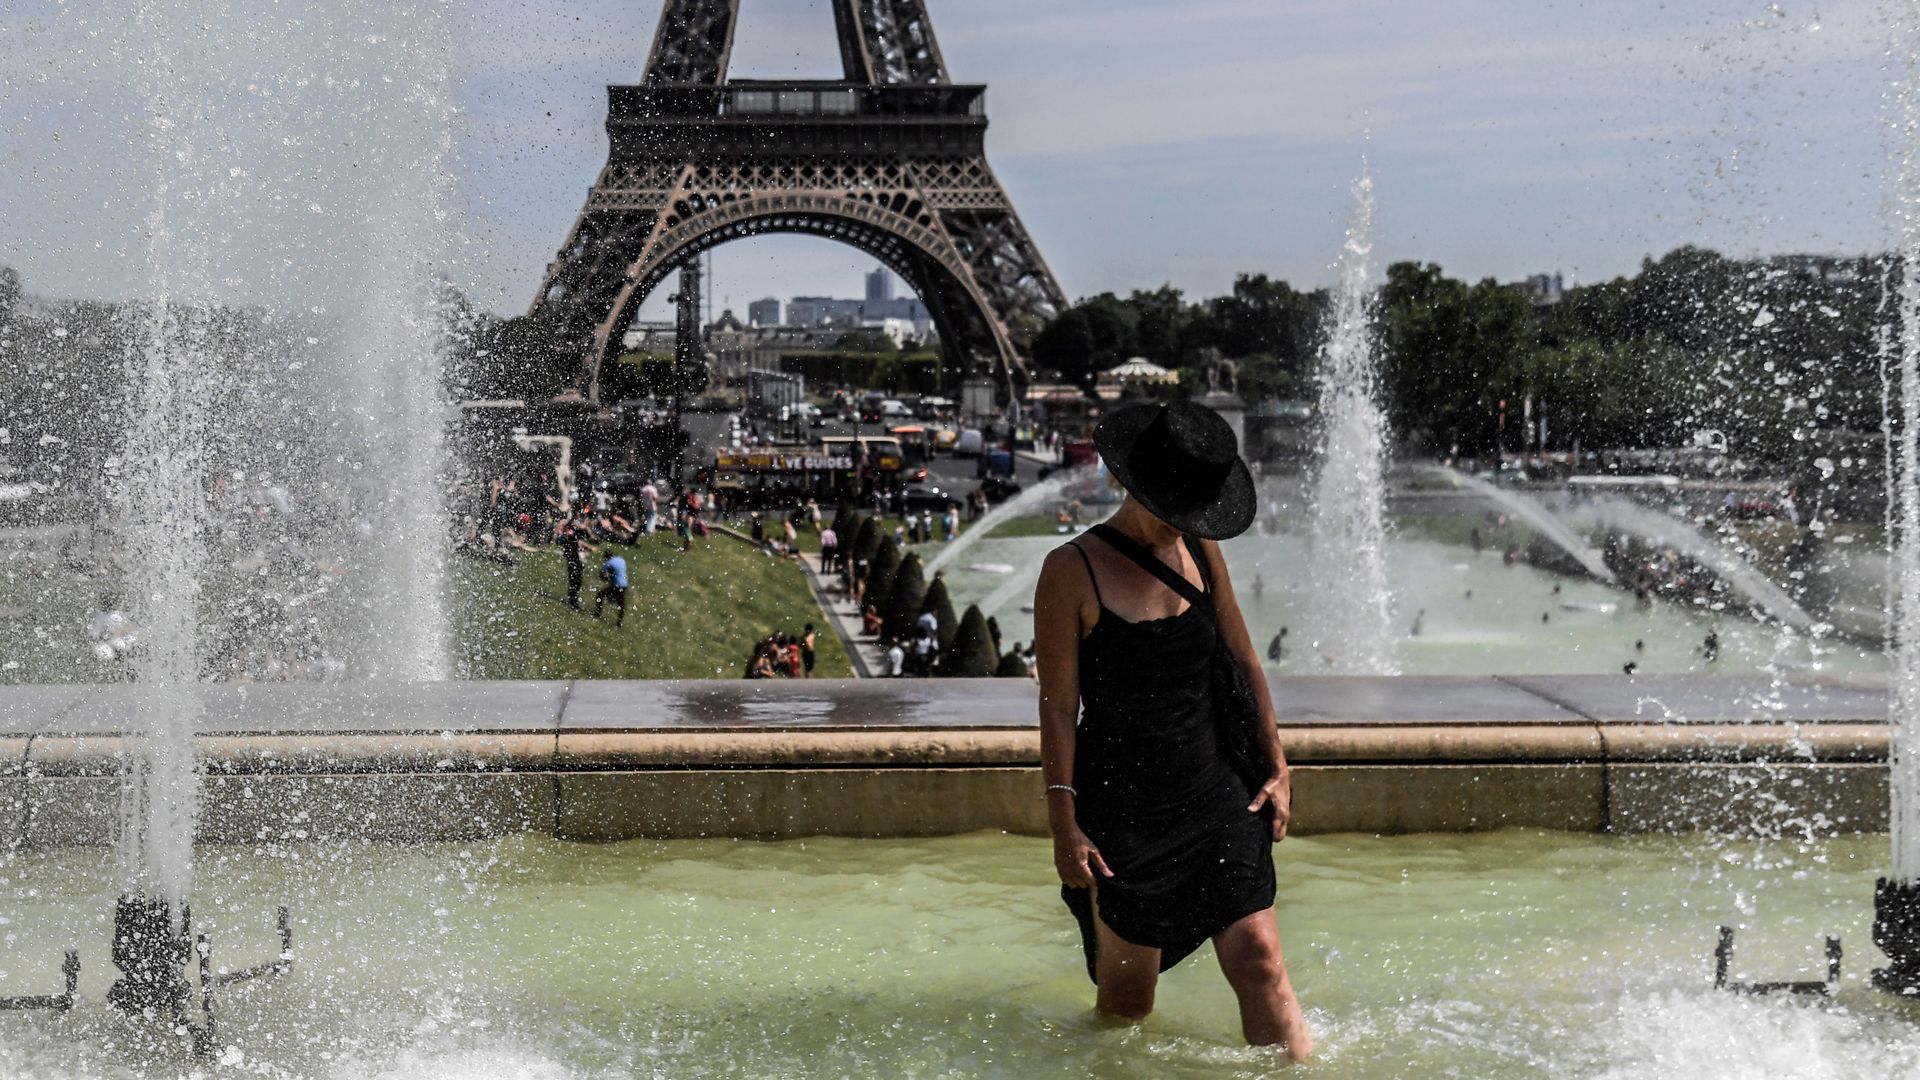 A woman cools off at the Trocadero Fountains near the Eiffel Tower in Paris, on July 22.